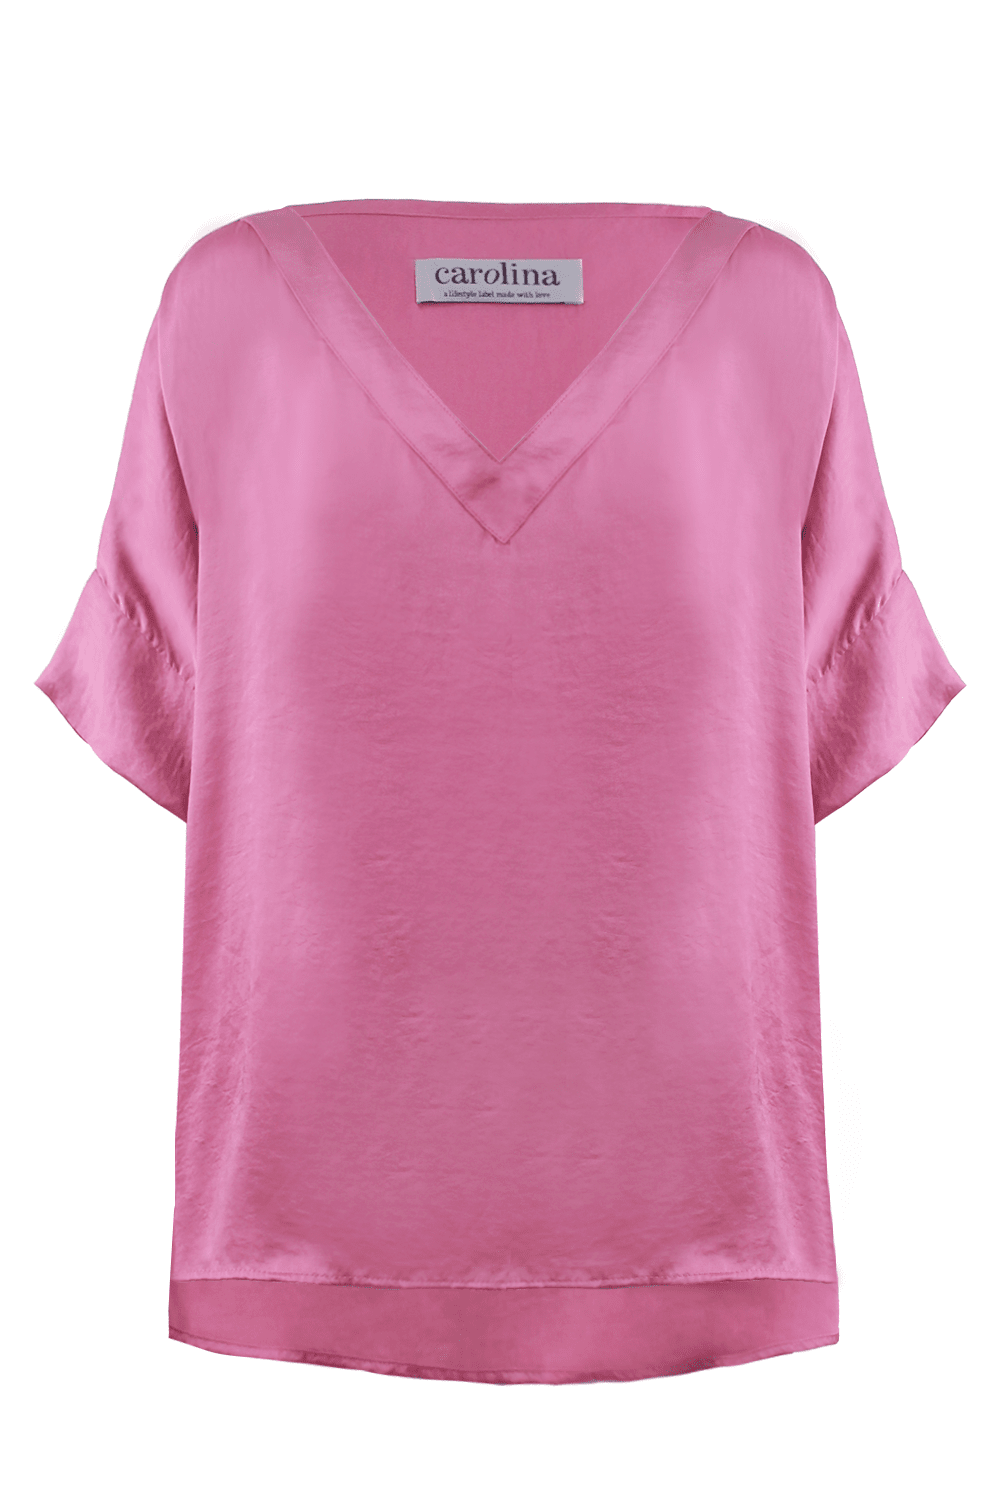 Bianca Short Sleeve Top Pink with V Neck Tops